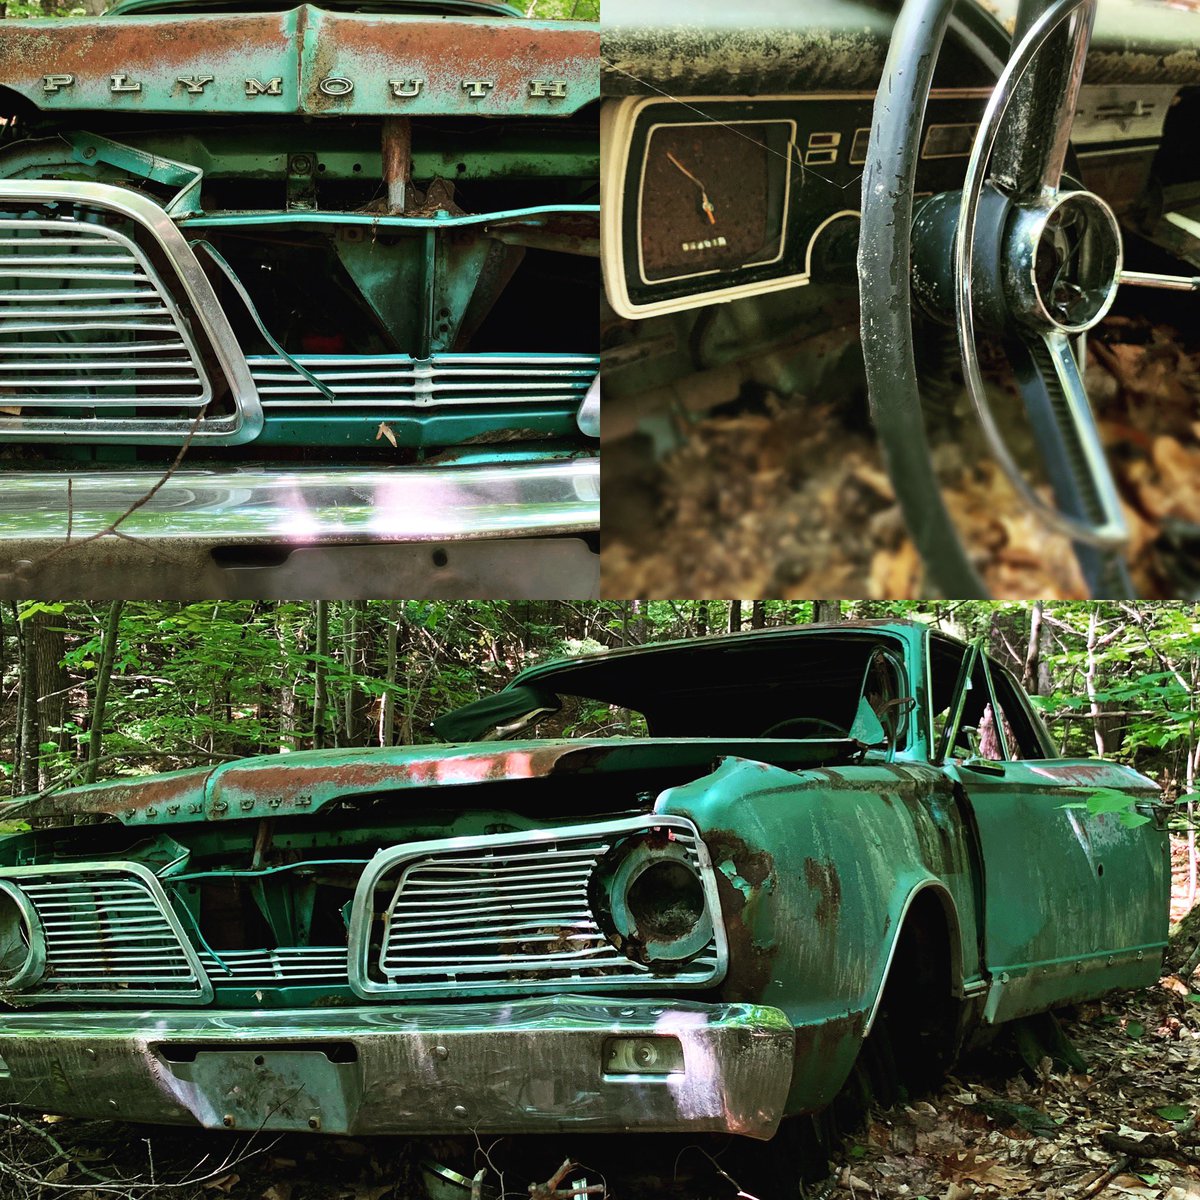 #abandoned in the woods. 
I am sure it once was a beautiful car!
#abandonedcar #plymouth #oldcars #valiant #plymouthvaliant #nostalgia #exploretheoutdoors #deepinthewoods